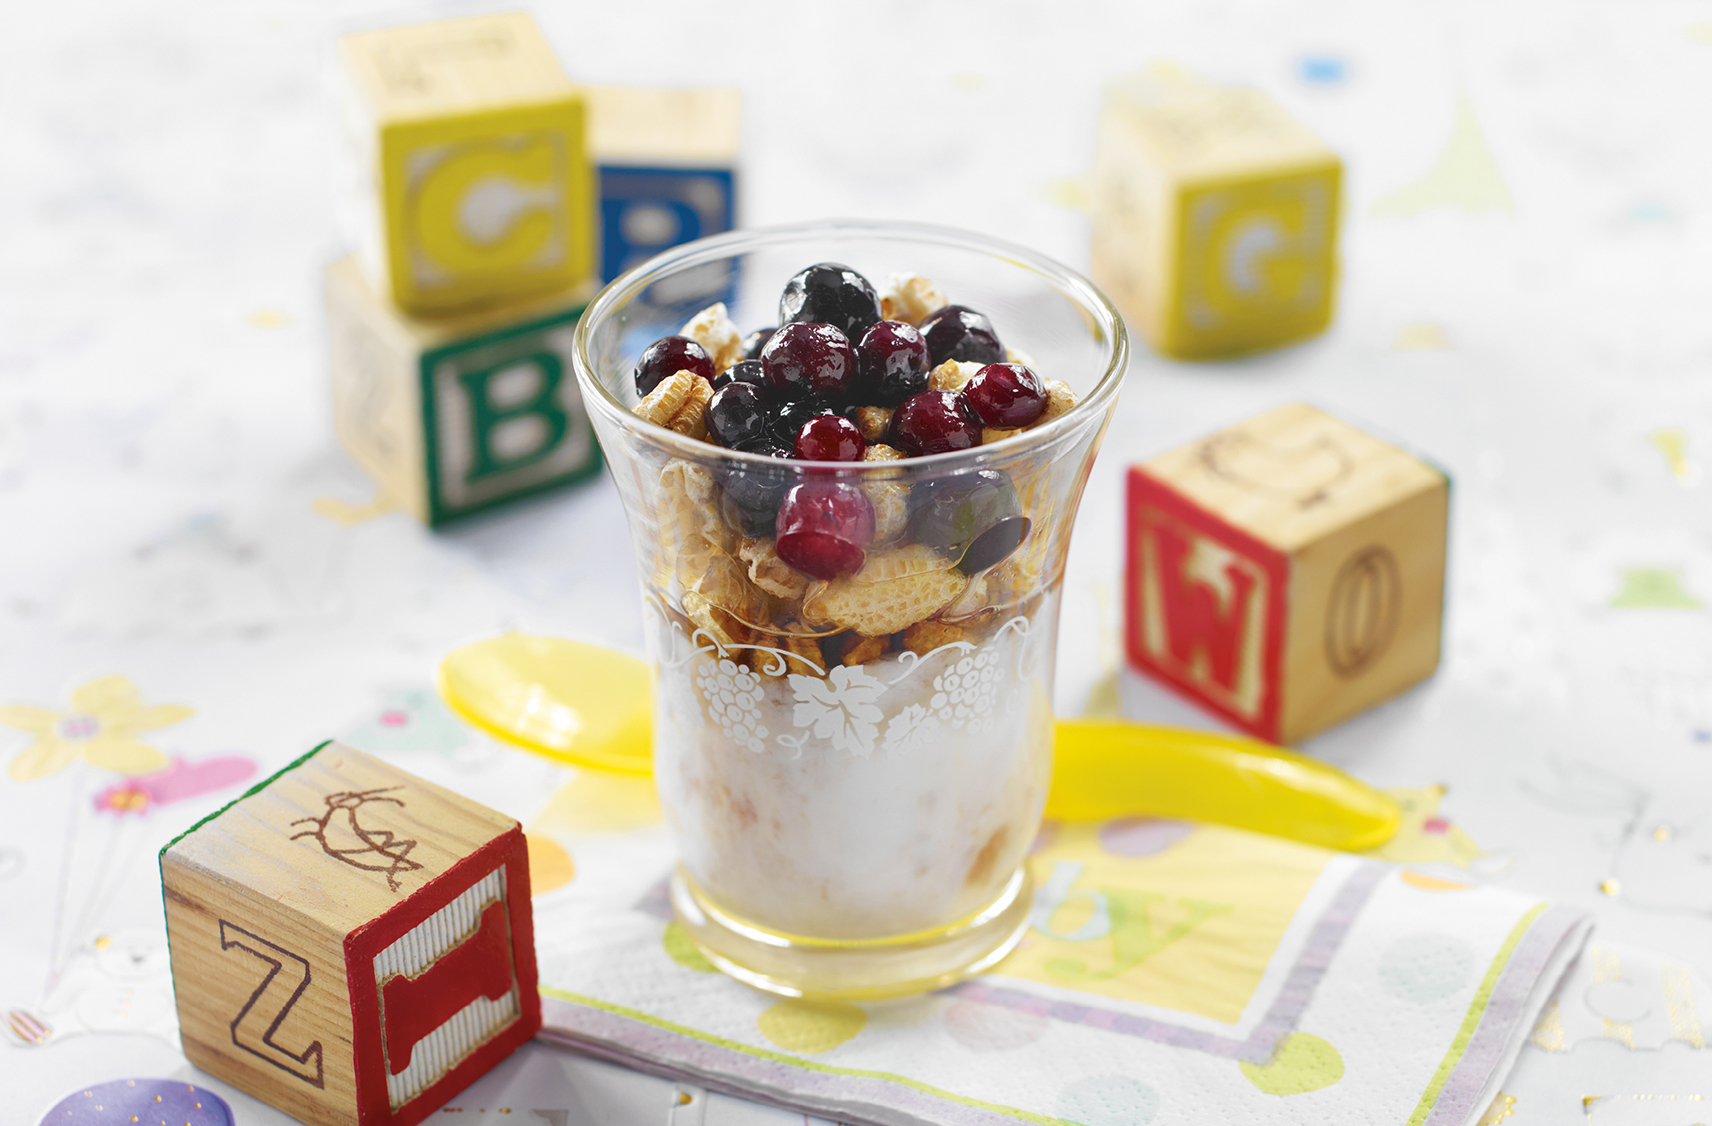 Juice glass of yogurt topped with cereal & berries  